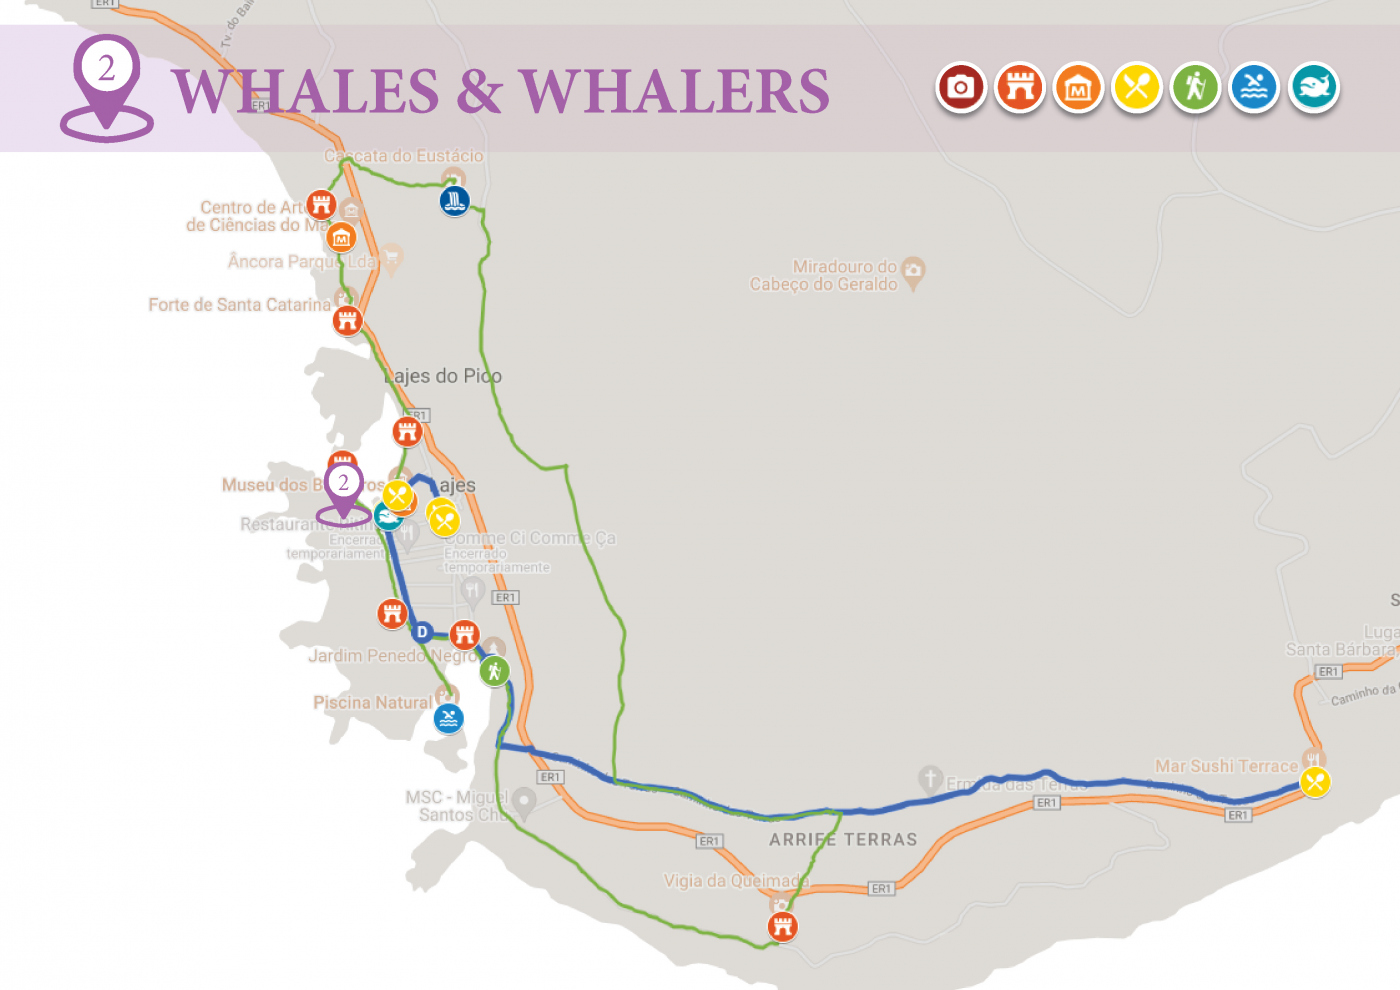 Travel guide to visit Pico Island | Whales & Whalers